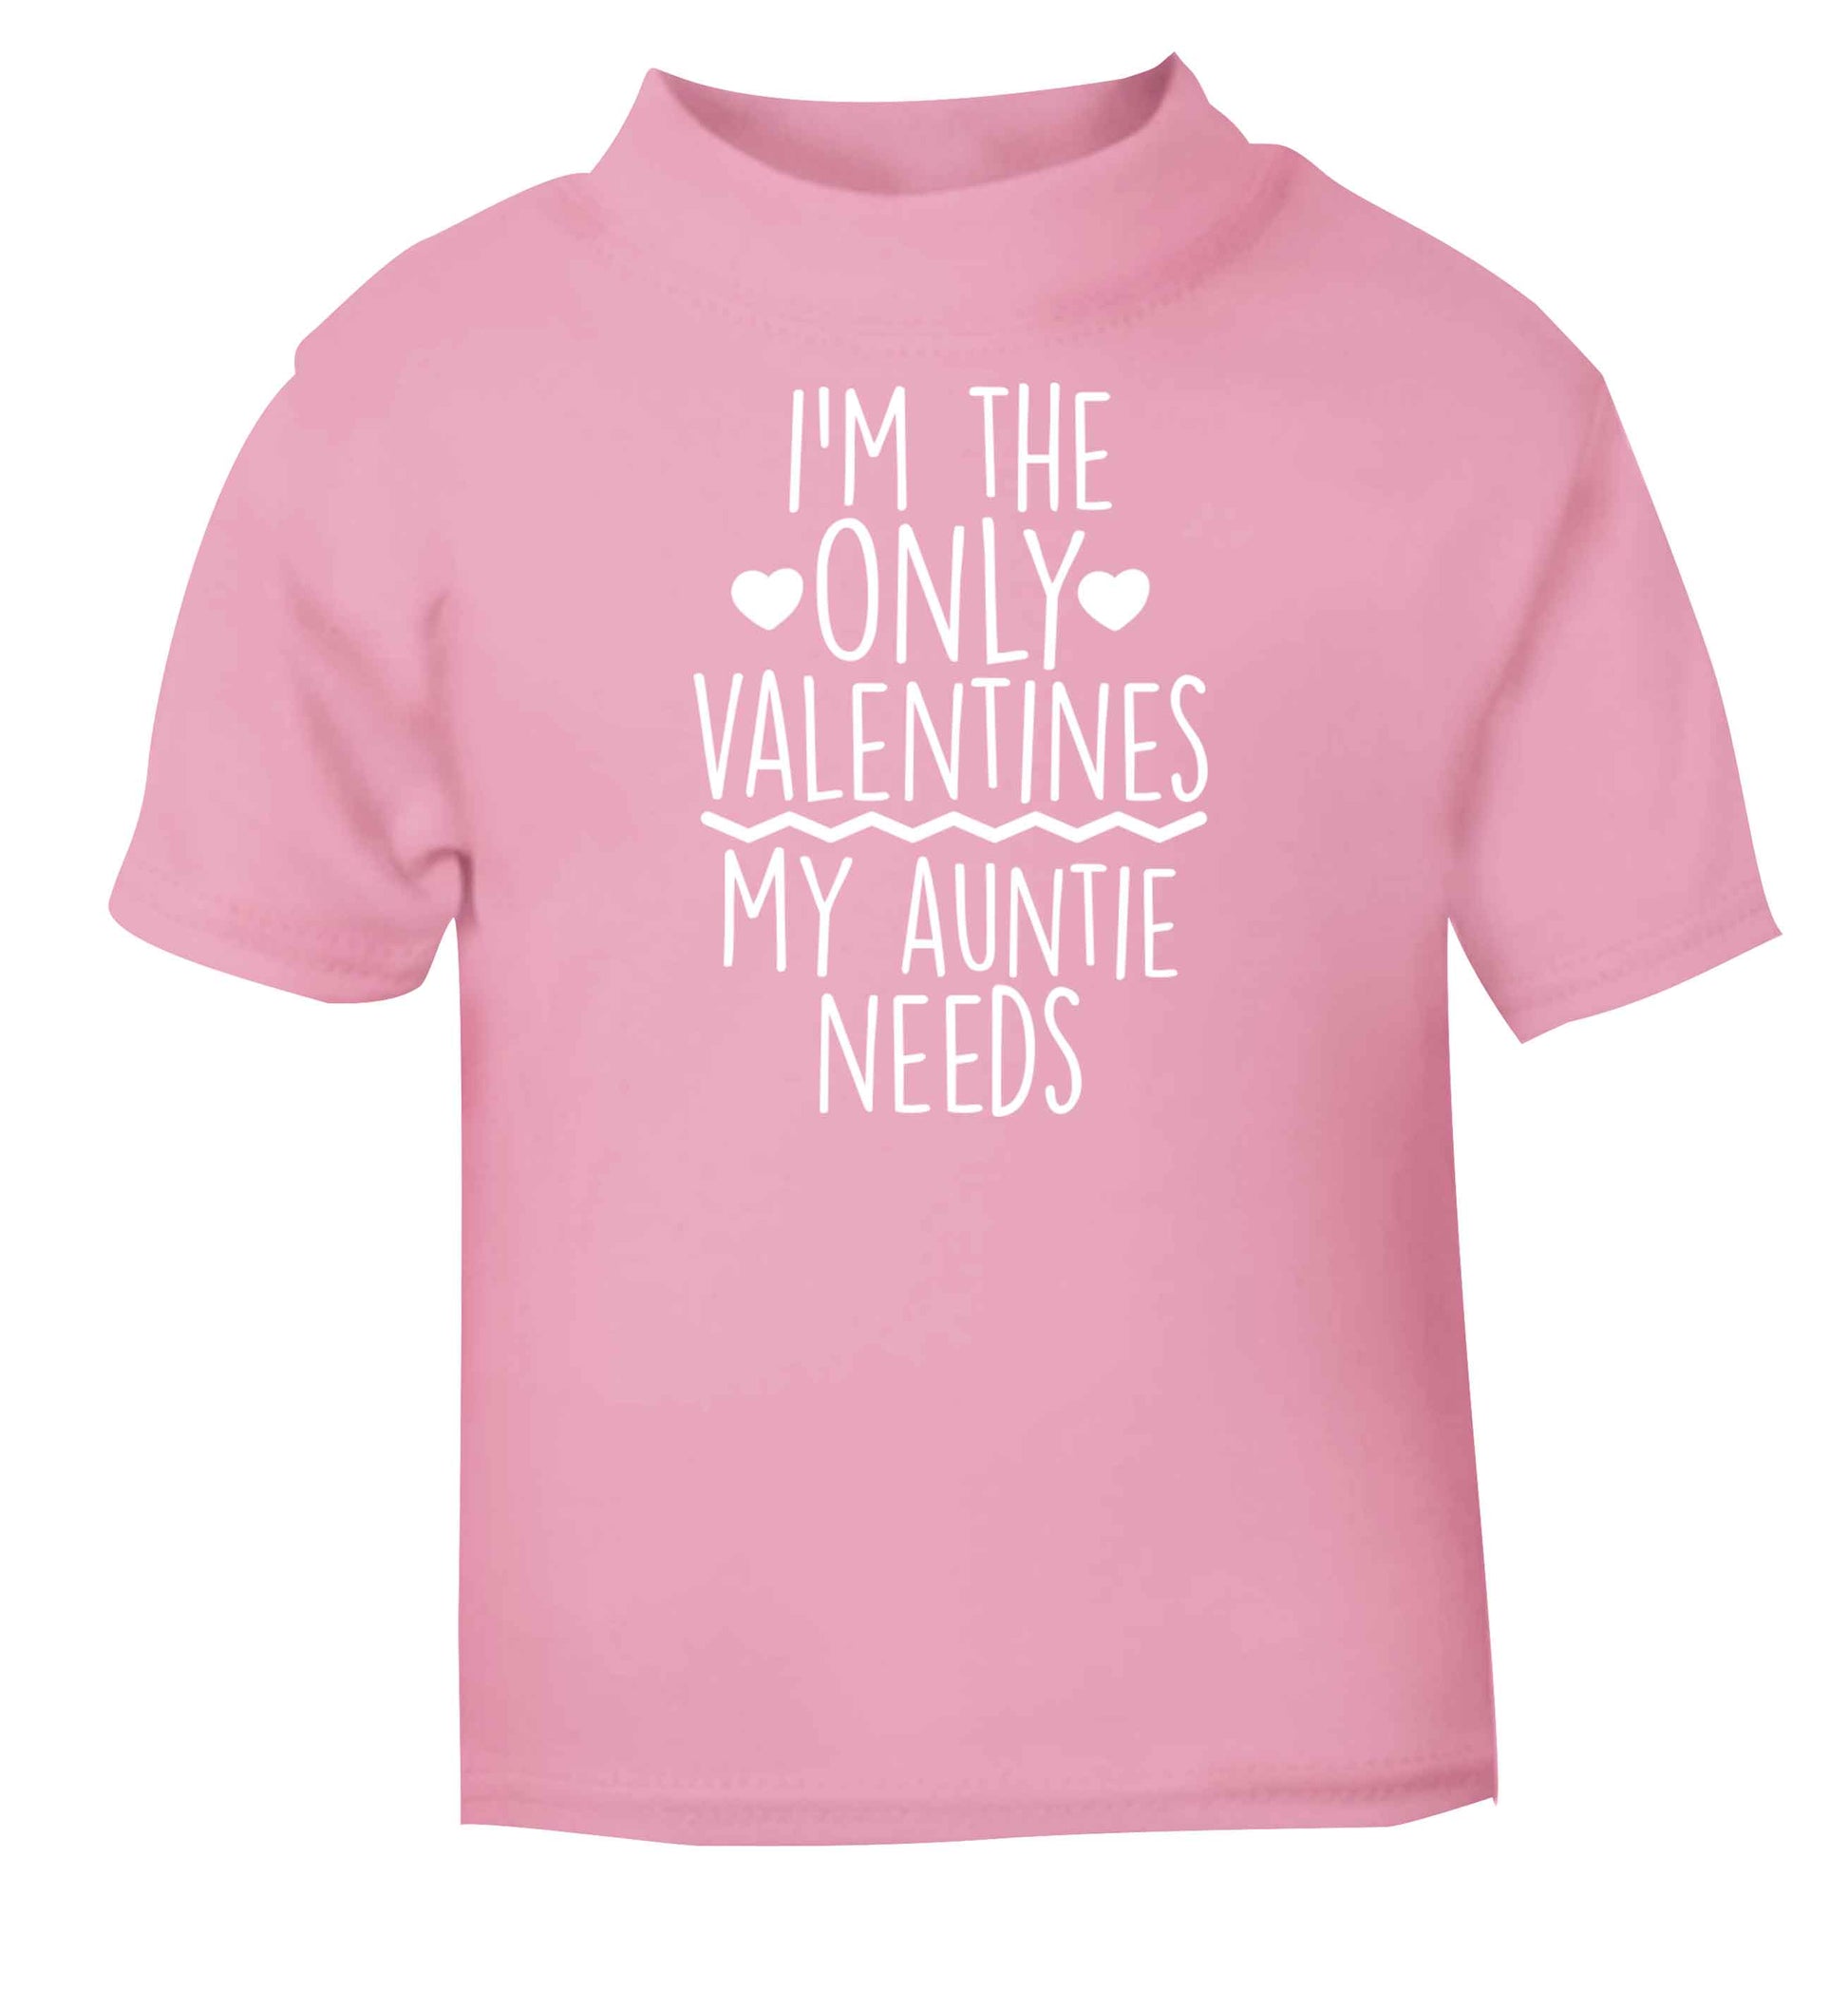 I'm the only valentines my auntie needs light pink baby toddler Tshirt 2 Years